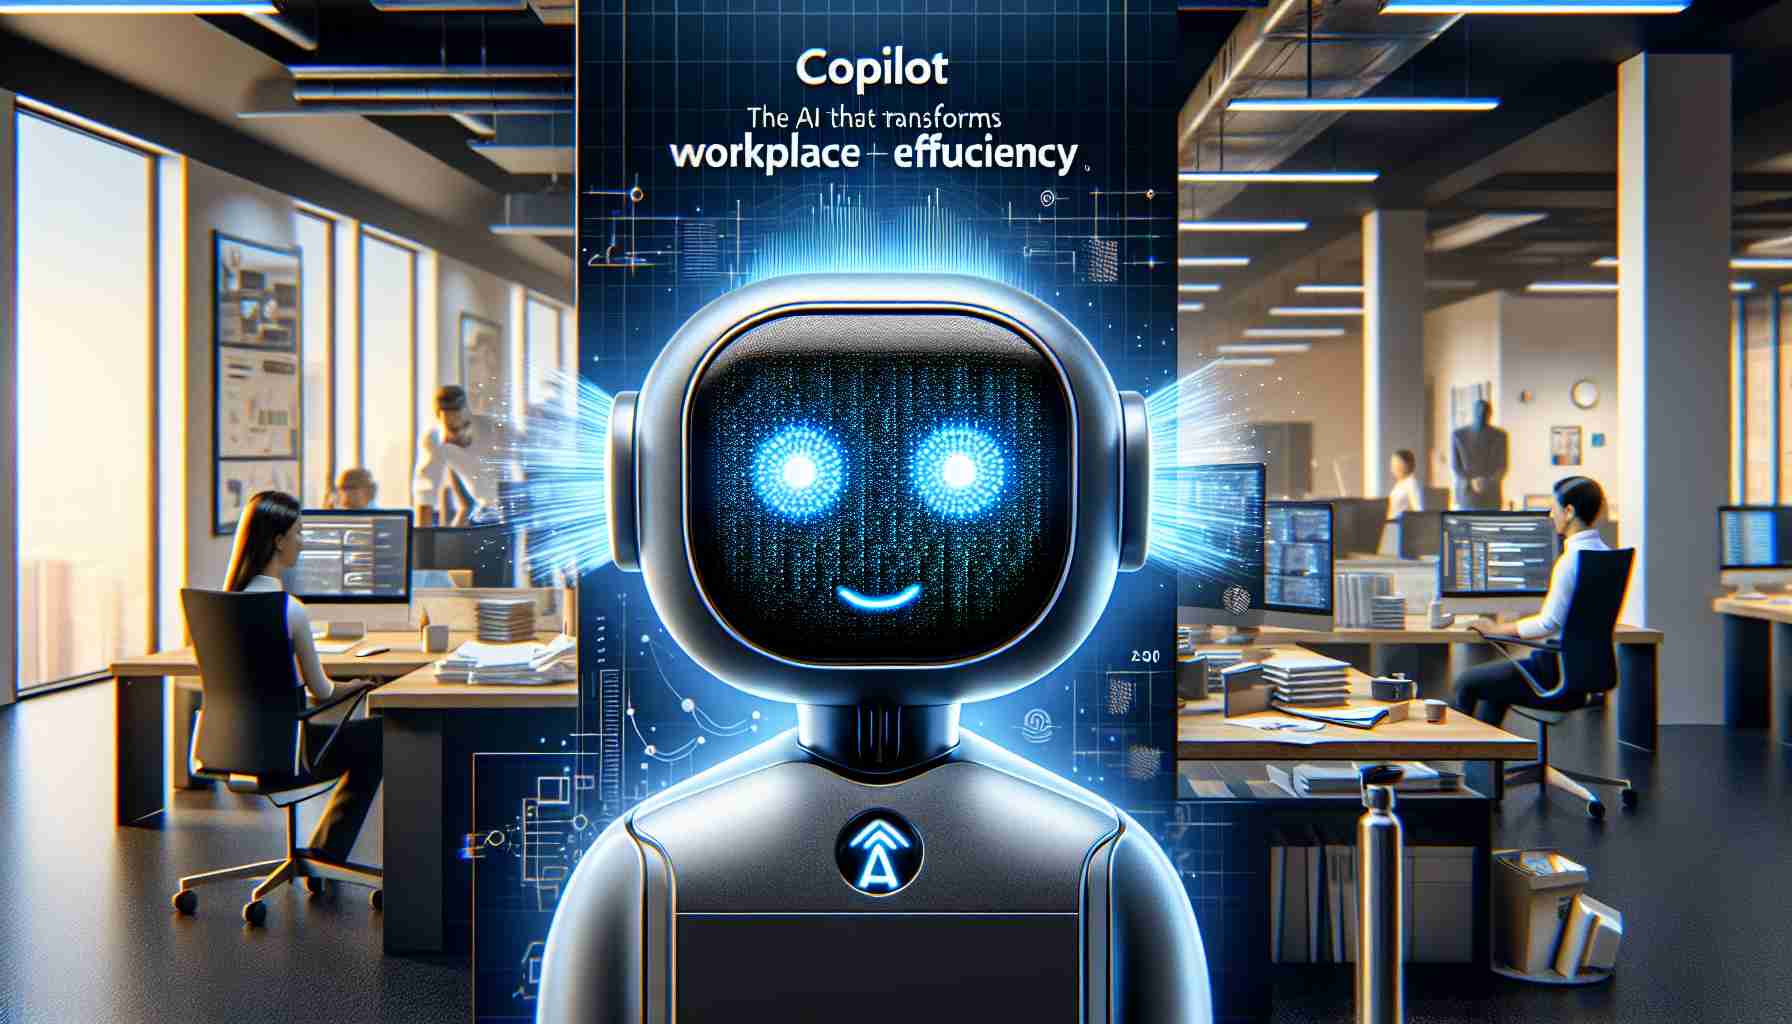 Introducing CoPilot: The AI That Transforms Workplace Efficiency